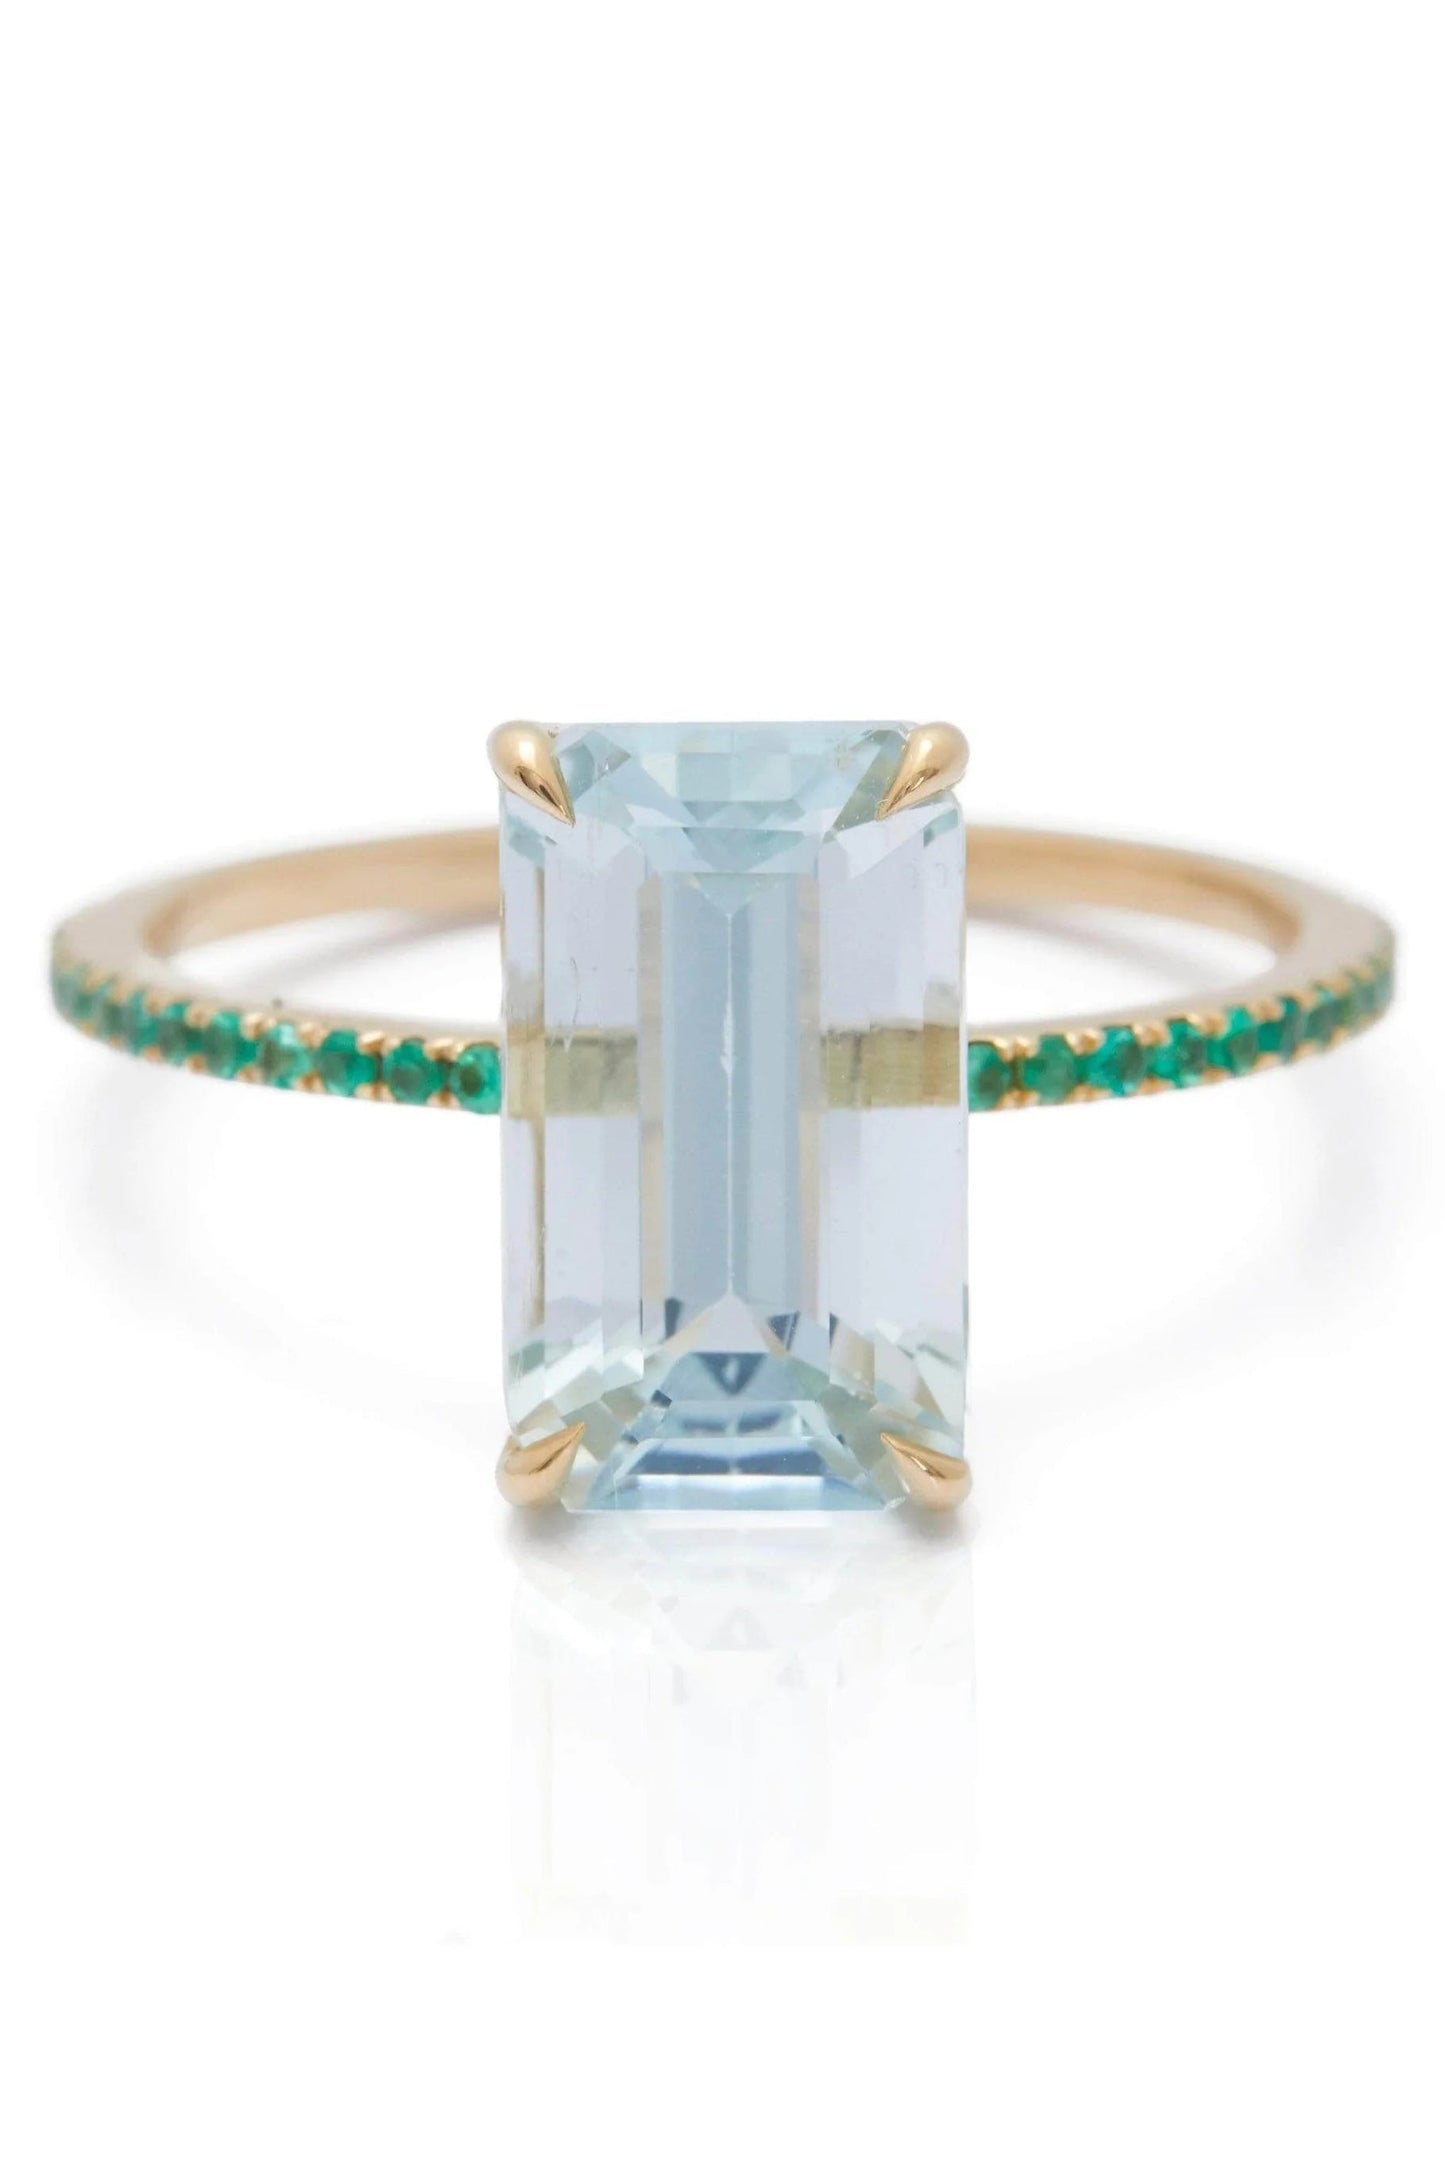 YI COLLECTION-Aquamarine and Emerald Spring Ring-YELLOW GOLD